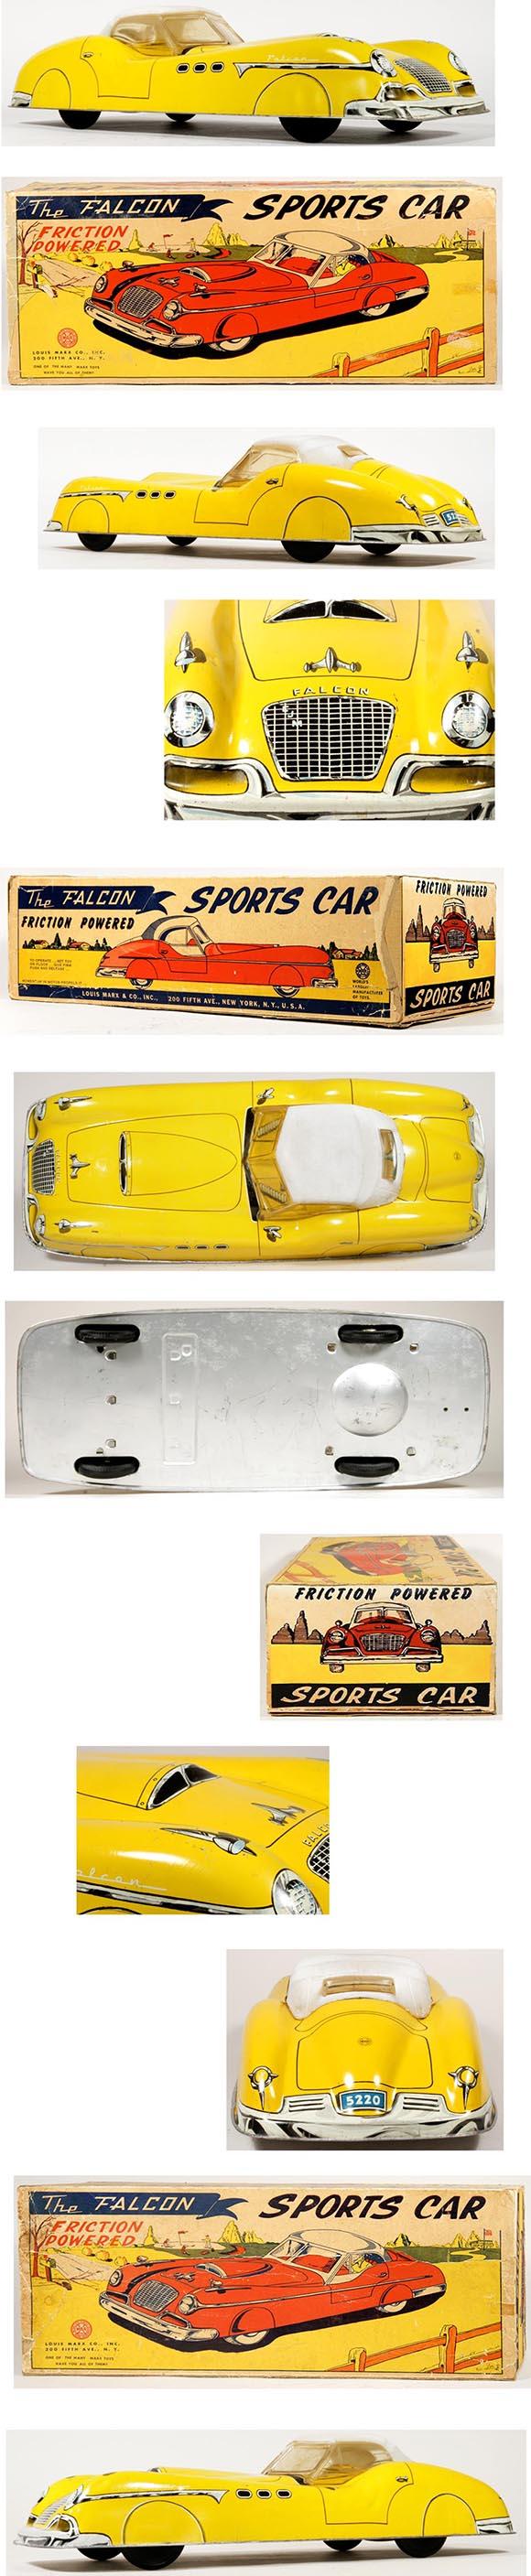 1956 Marx, The Falcon Friction Sports Car (Yellow) in Original Box